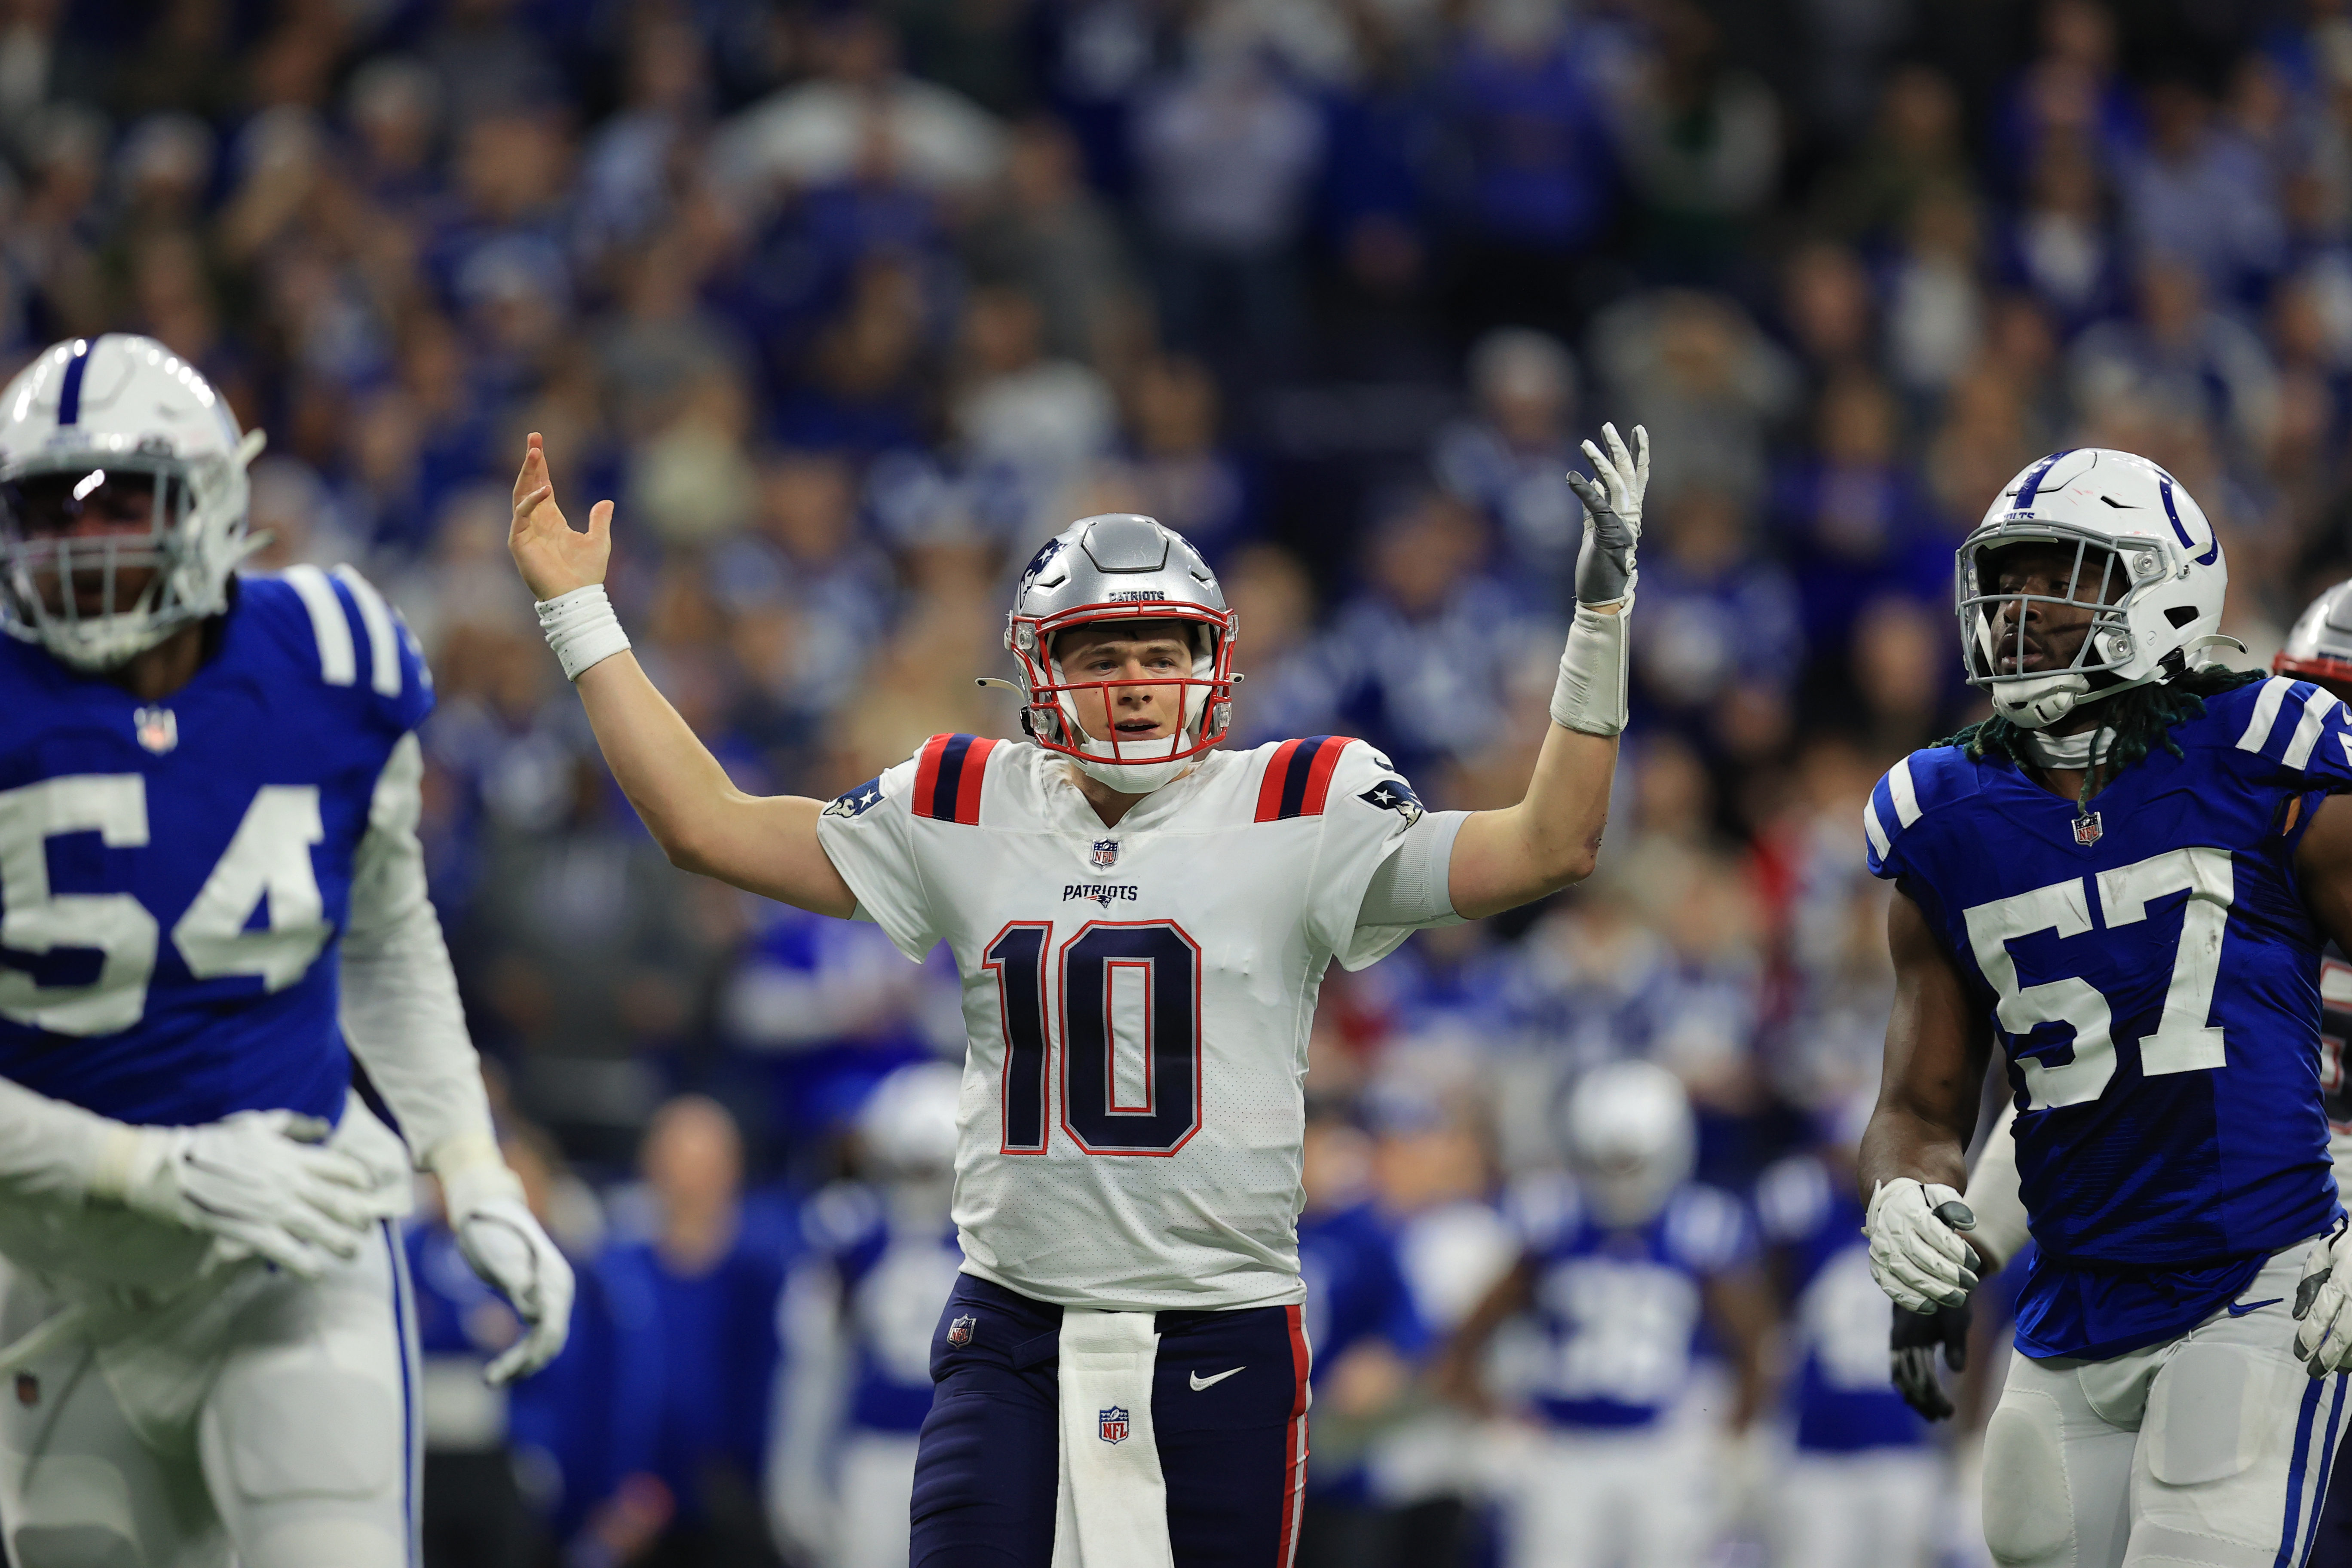 Model shows playoff implications for Saturday's Patriots-Colts game